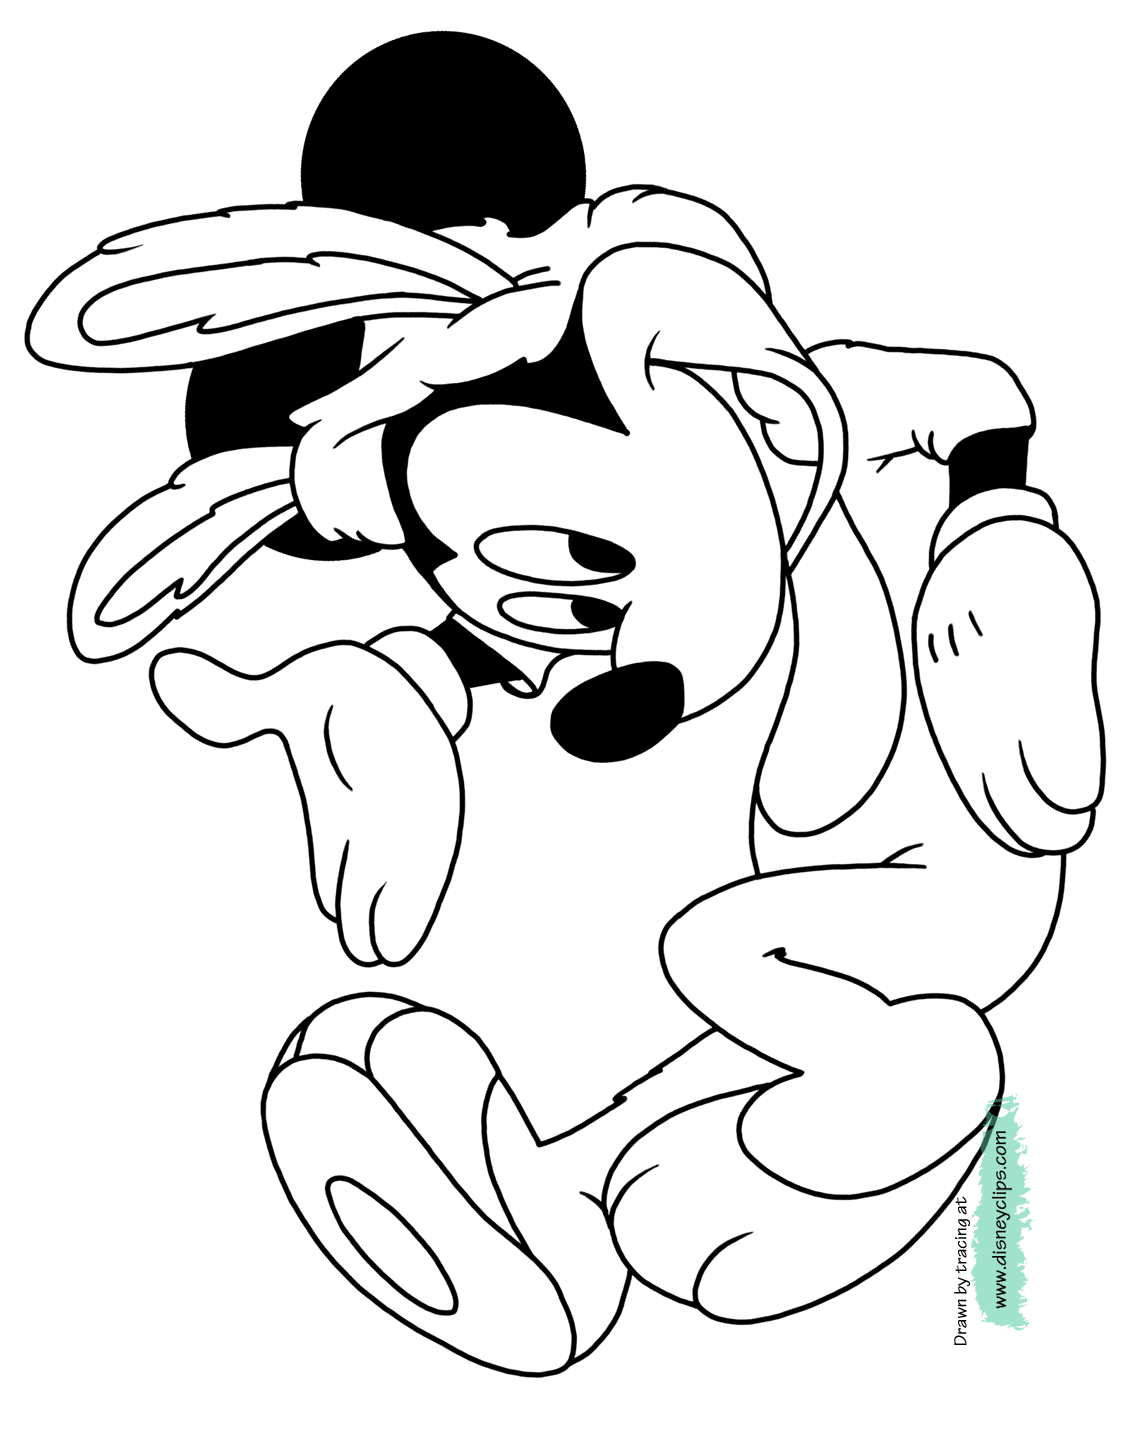 Mickey as the Easter bunny coloring page